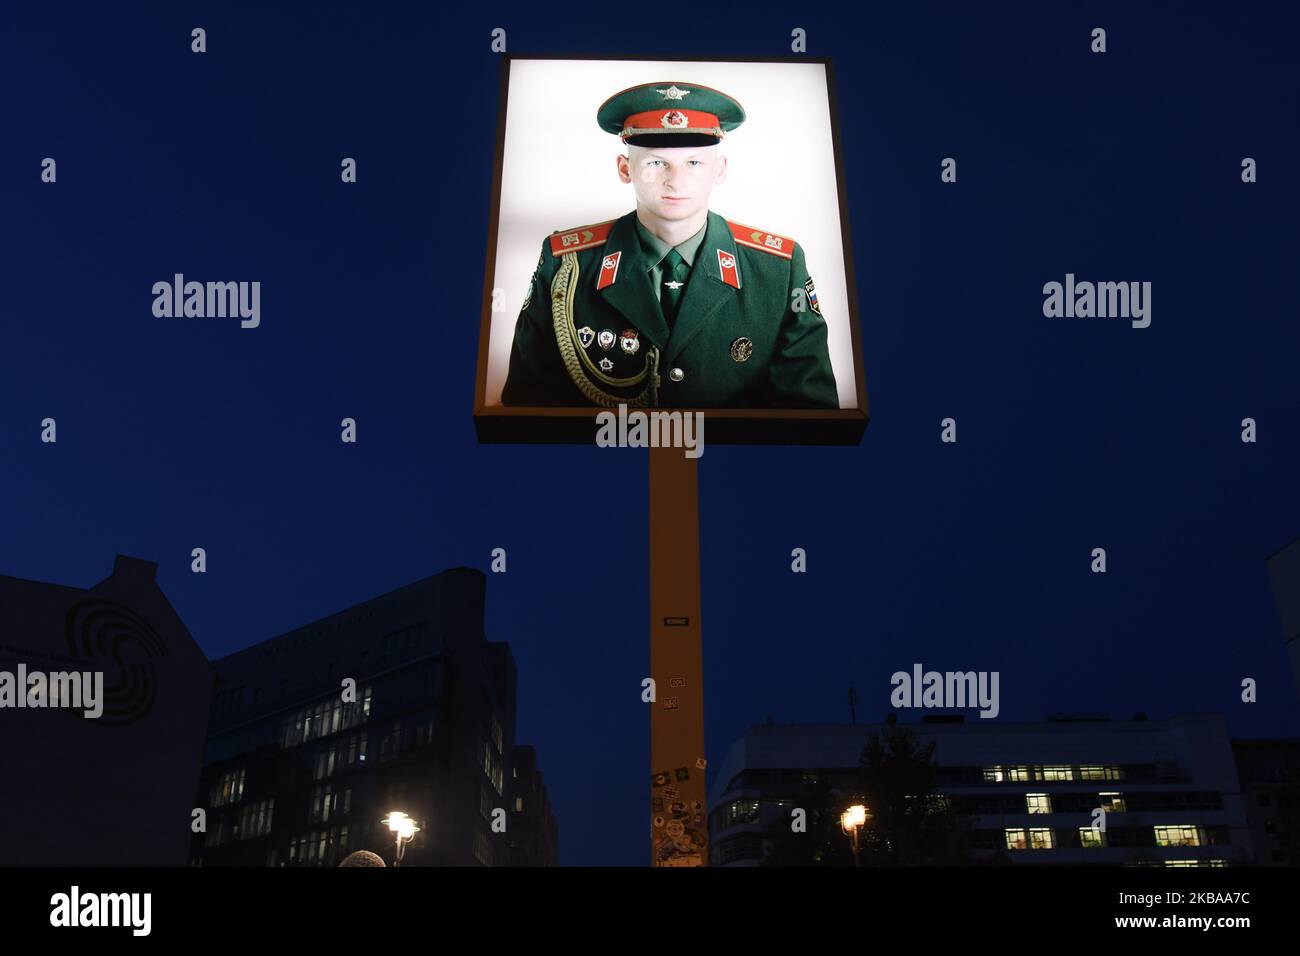 A portrait of a Russian soldier stands illuminated at former Checkpoint Charlie, where U.S. and Soviet tanks confronted each other in the early years of the Cold War, seen just two days ahead of the upcoming 30th anniversary of the fall of the Berlin Wall. The Berlin Wall divided the German capital from 1961 until 1989. Checkpoint Charlie was a main crossing point at the Wall from the American Sector in West Berlin into the Russian sector in East Berlin. On Thursday, November 7, 2019, in Berlin, Germany. (Photo by Artur Widak/NurPhoto) Stock Photo